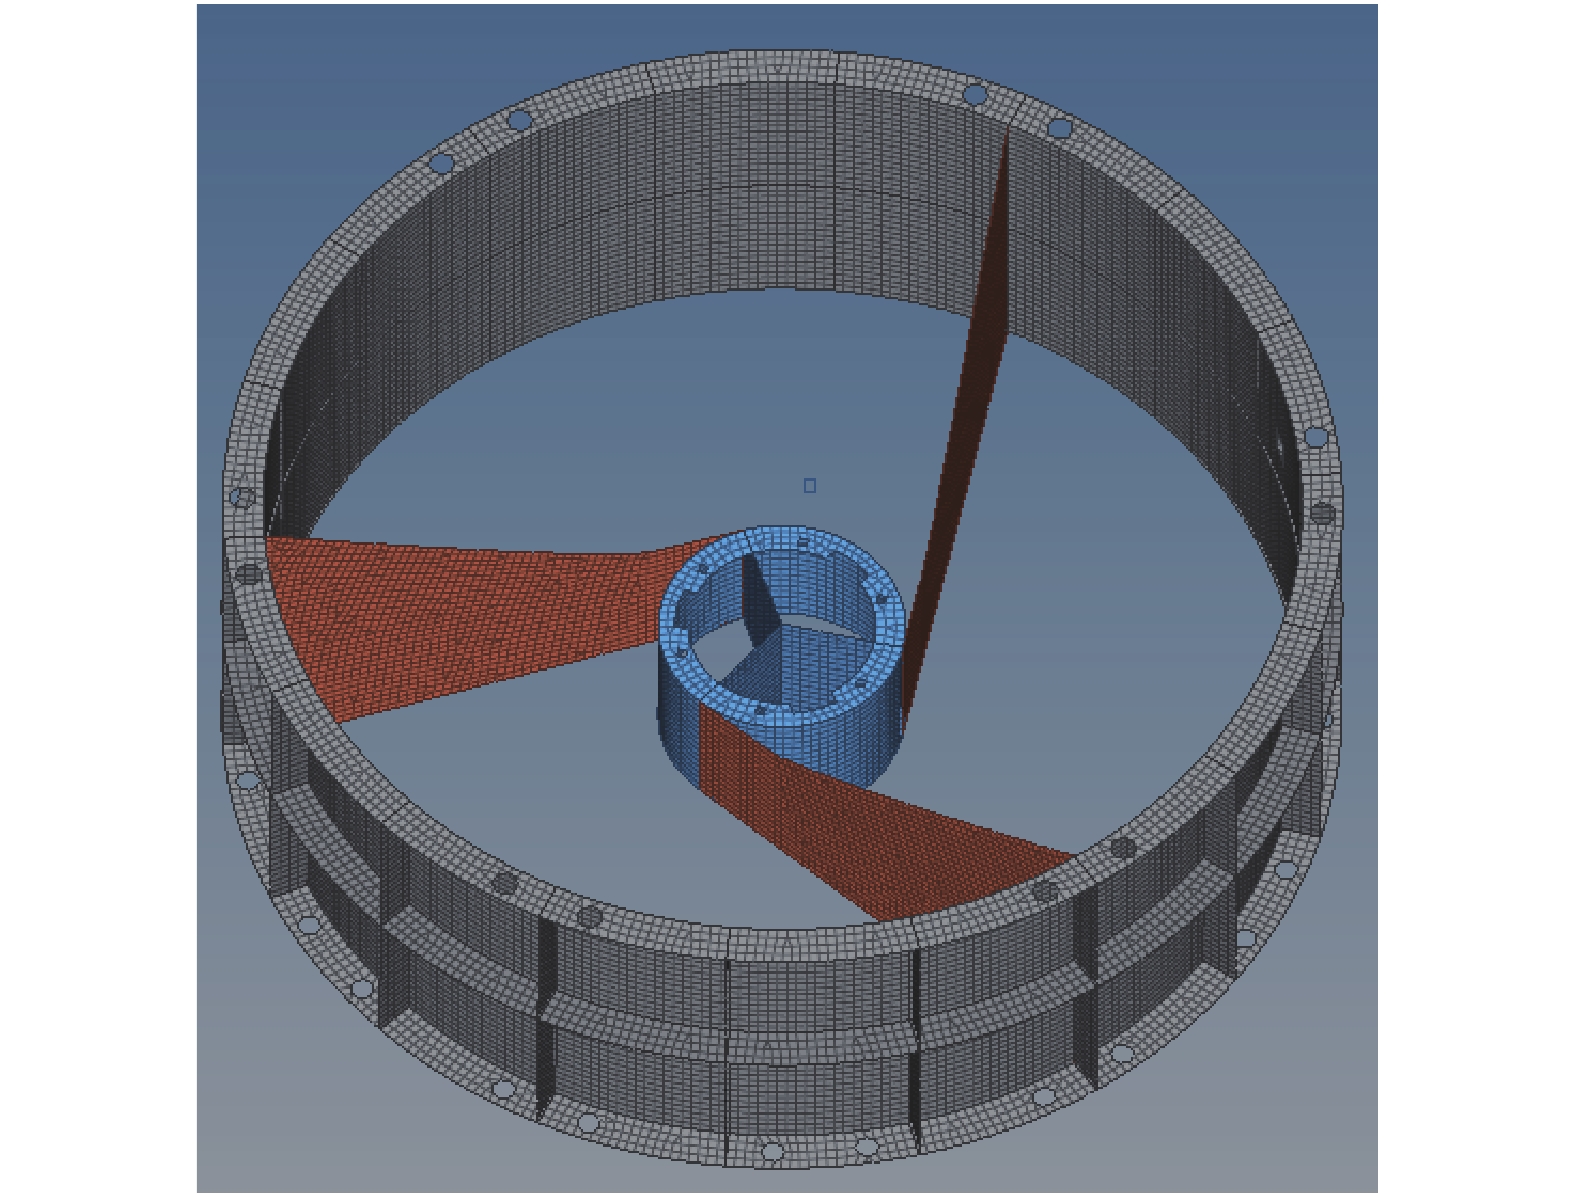 Finite element model of secondary mirror bearing cylinder